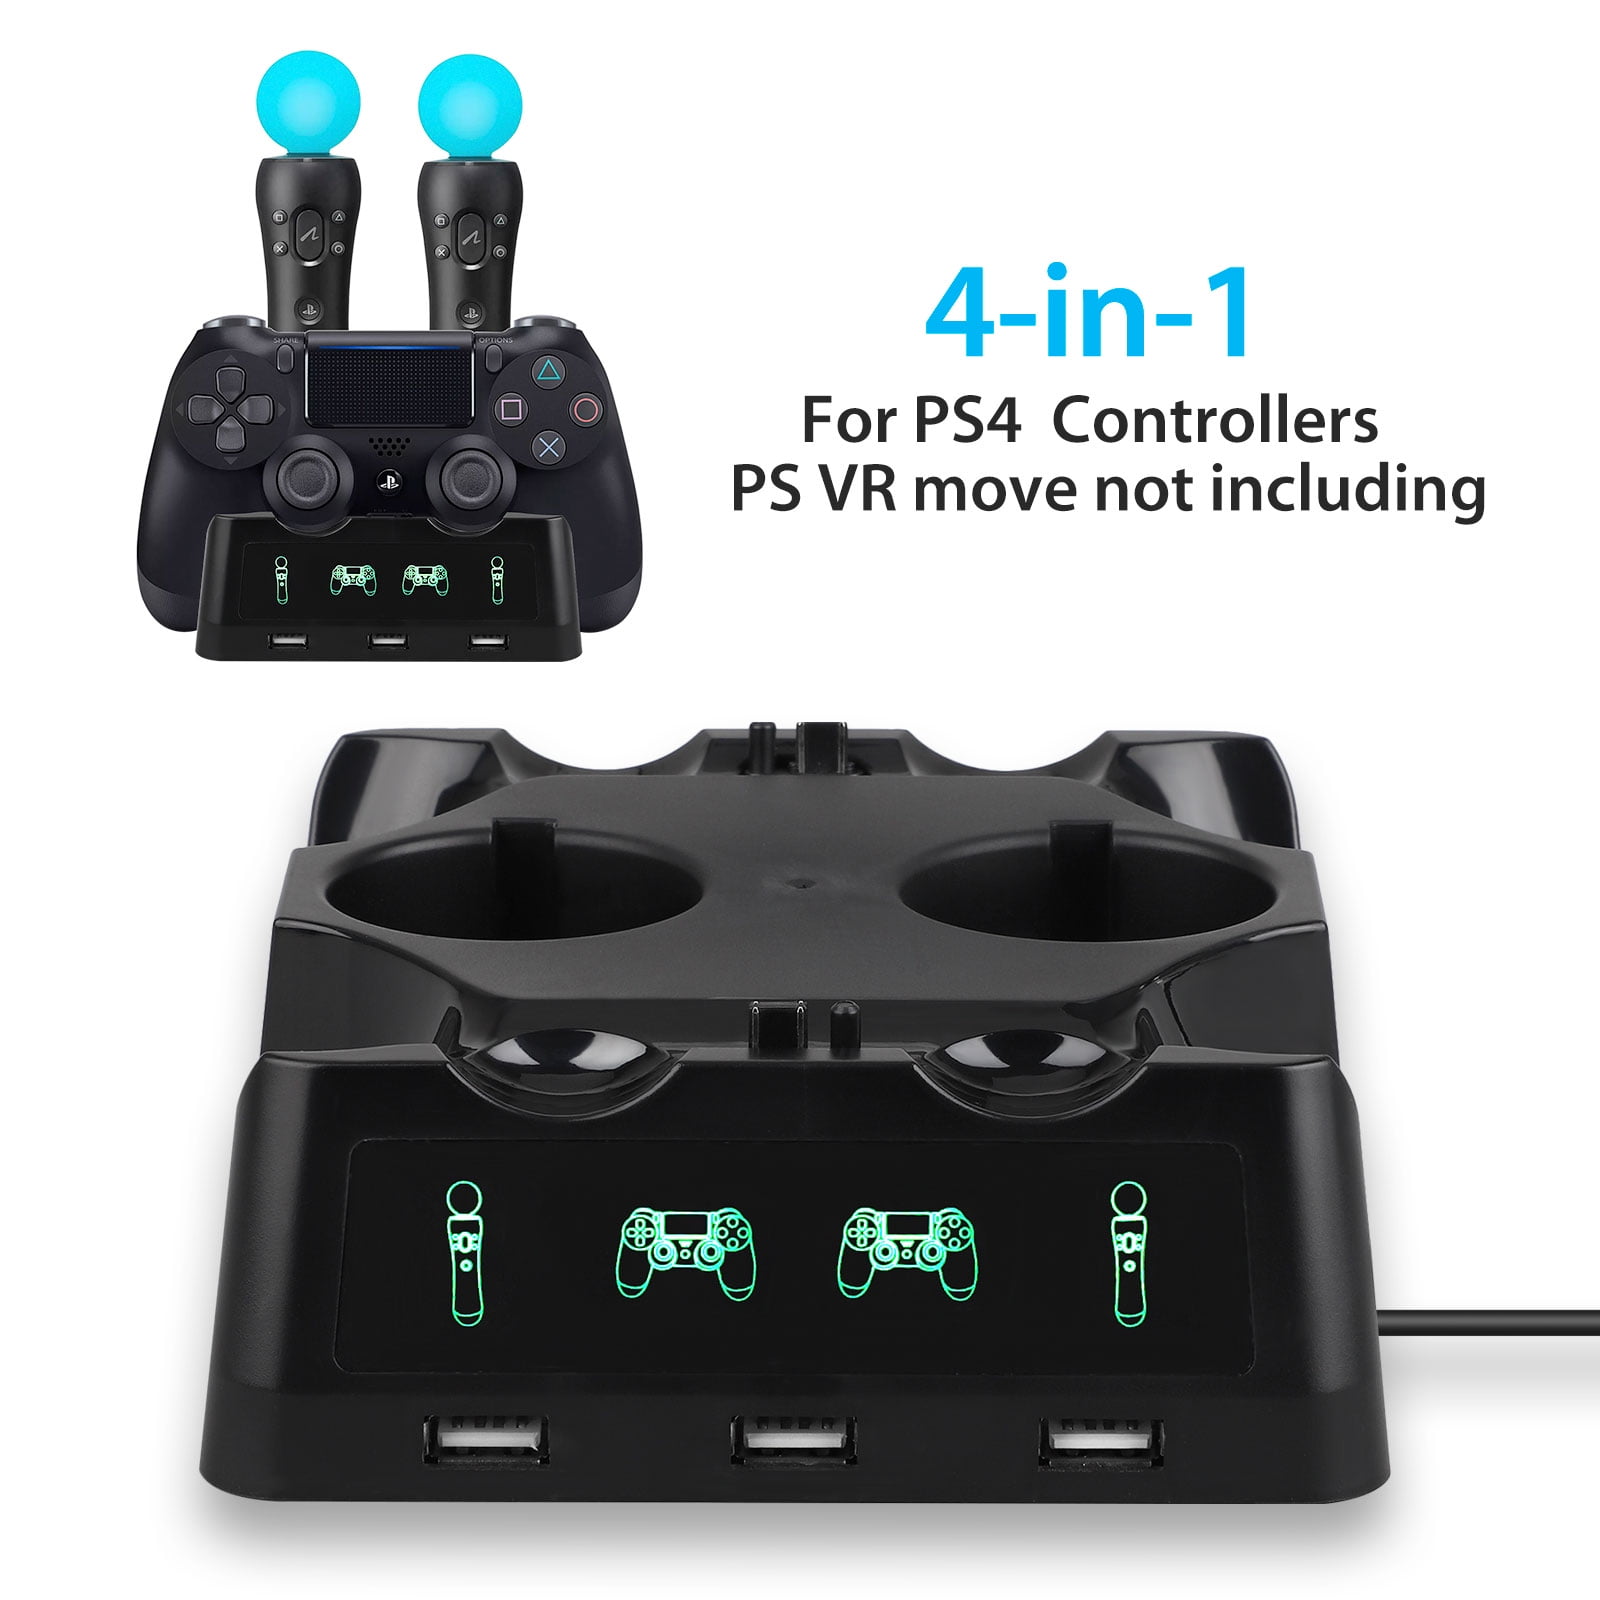 ps4 move controller charging dock